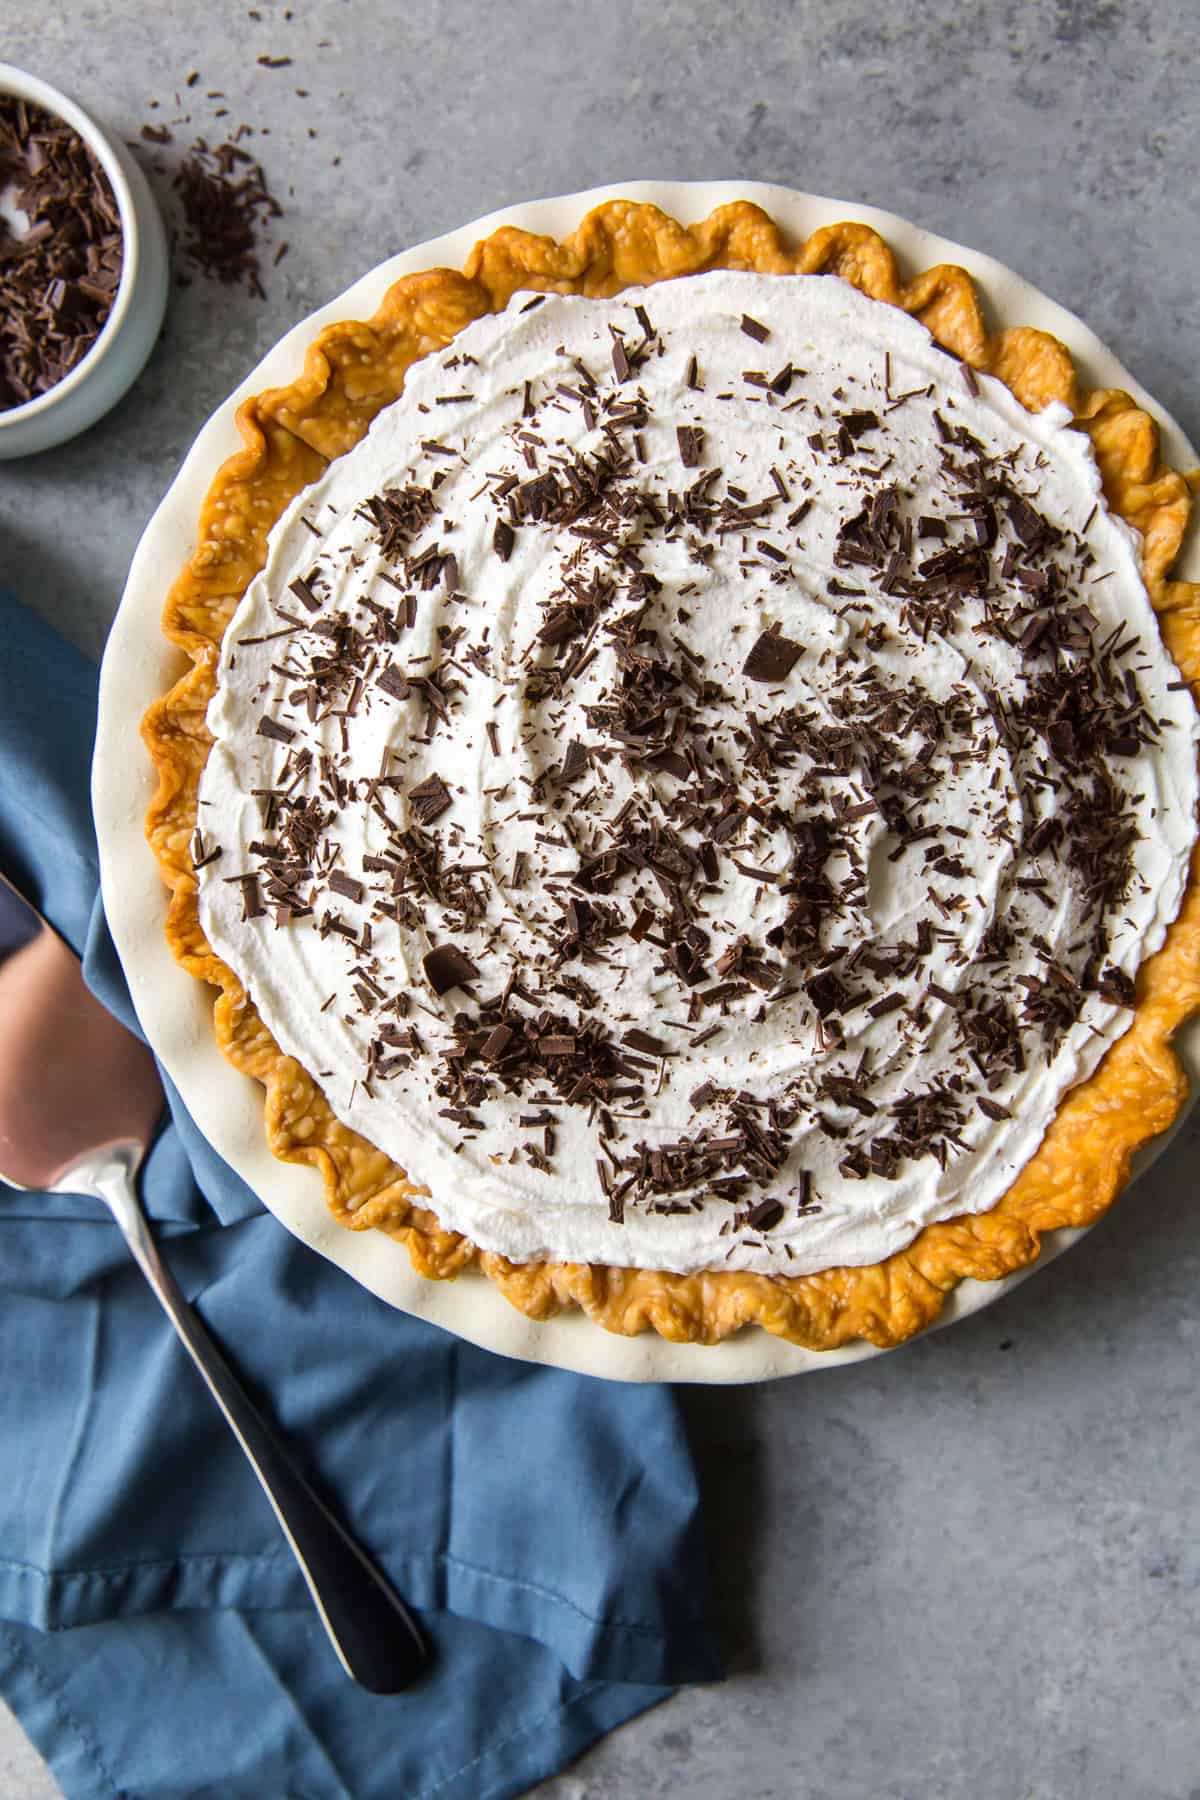 A pie topped with whipped cream and shaved chocolate shot from over the top.